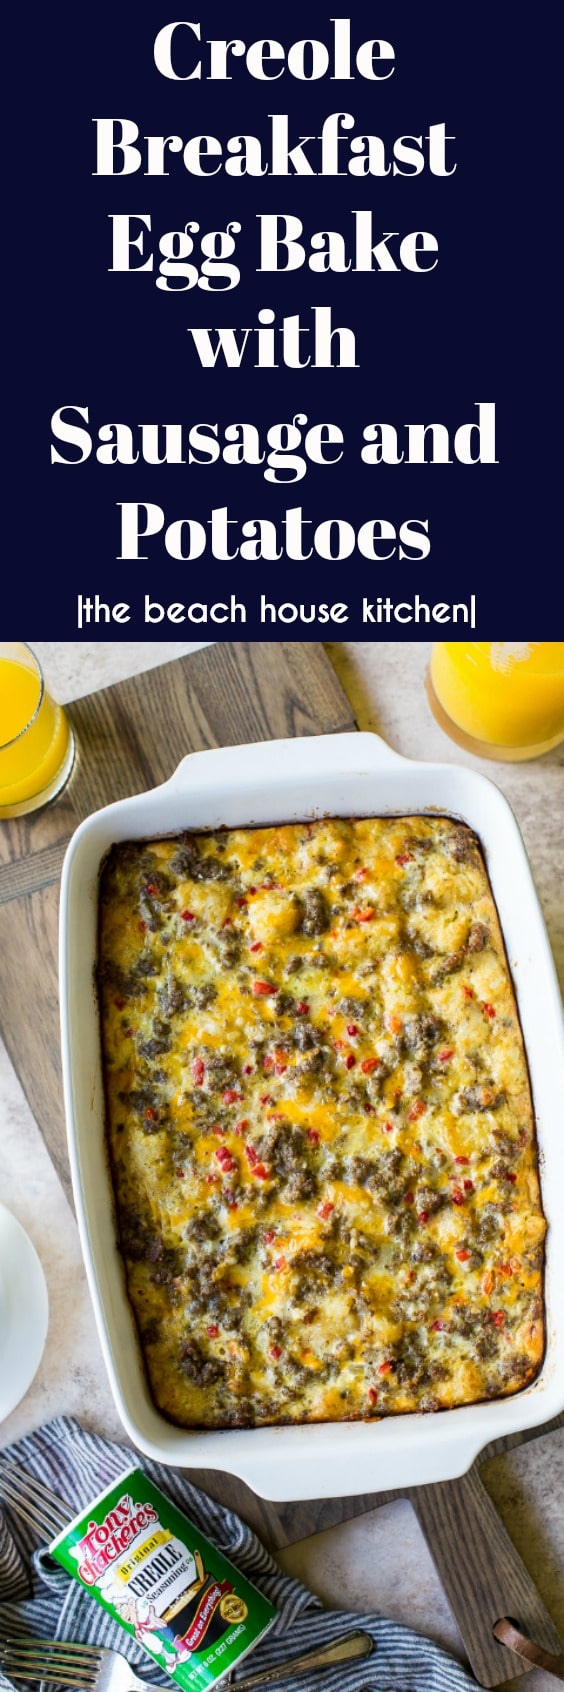 Creole Breakfast Egg Bake with Sausage and Potatoes | The Beach House ...